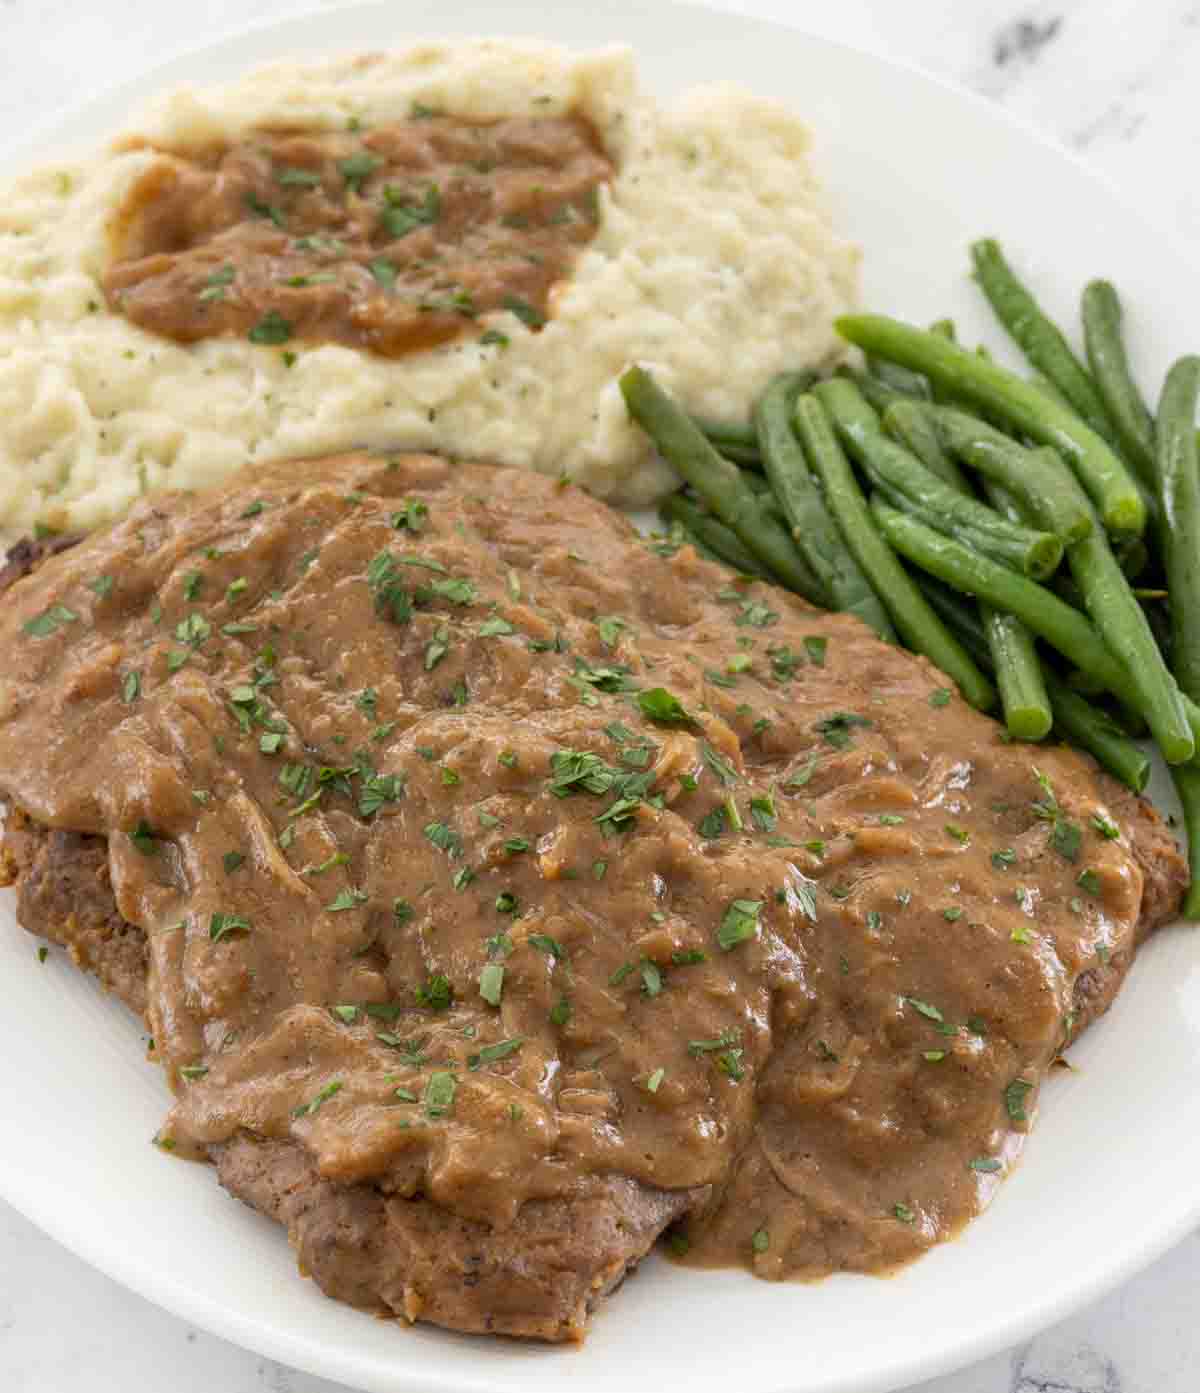 Smothered cube steak with mashed potatoes and green beans on a white plate.